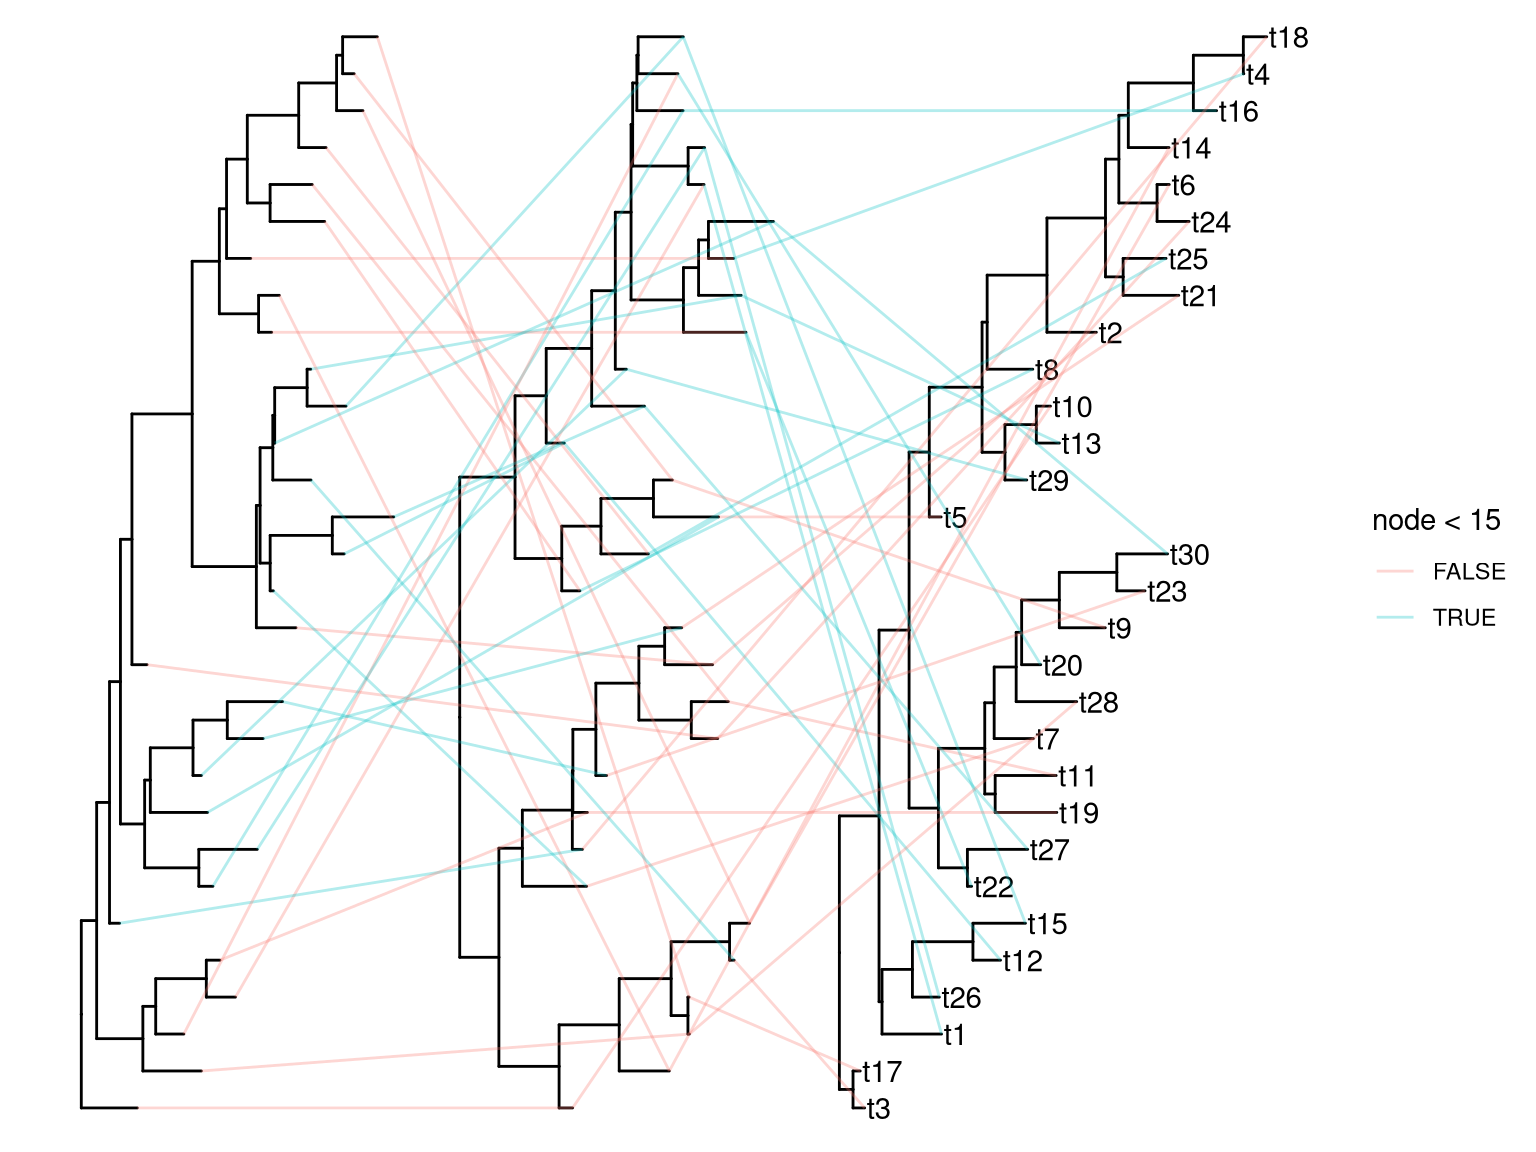 Plot multiple phylogenetic trees side by side. Plotting a tree using ggtree() and subsequently add multiple layers of trees by geom_tree().